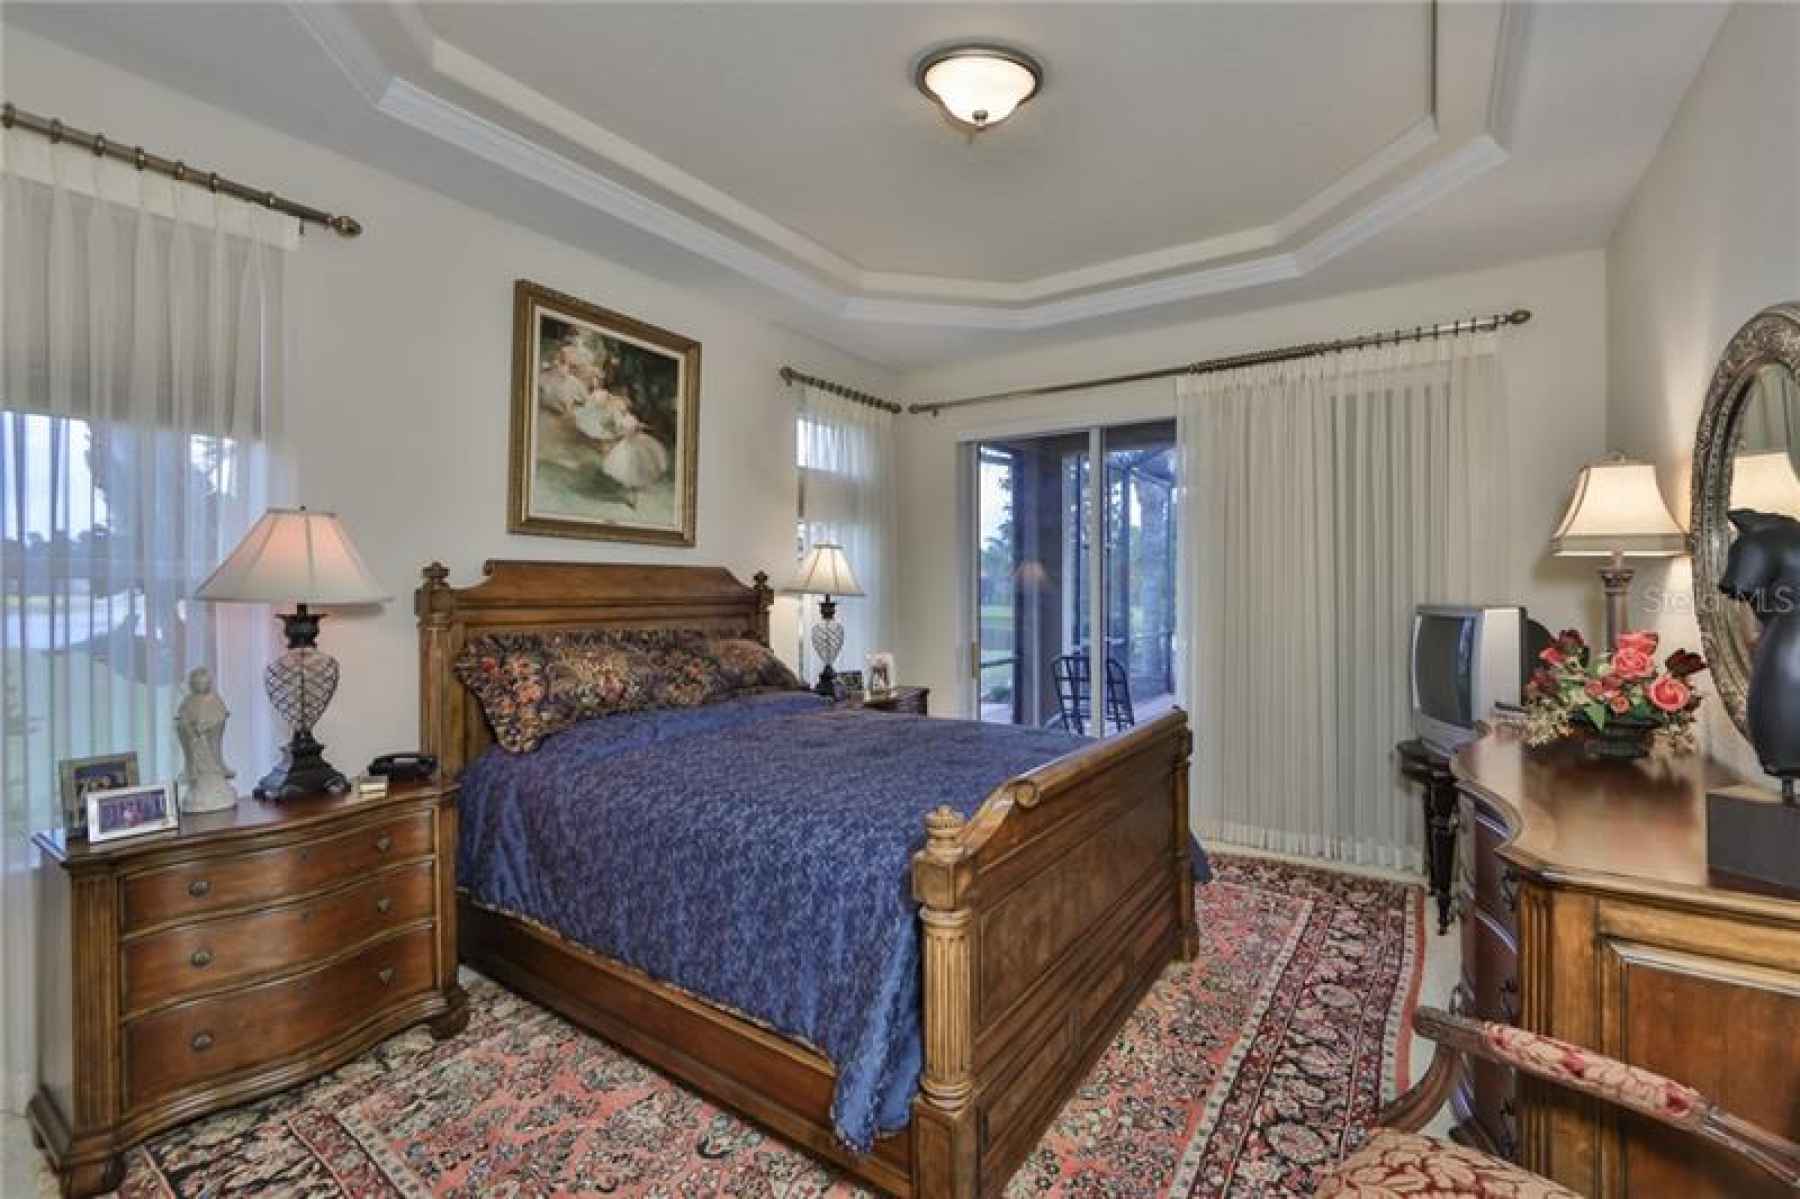 The Master bedroom is spacious and dipped in 'comfort', with a tray ceiling, large windows, large sl